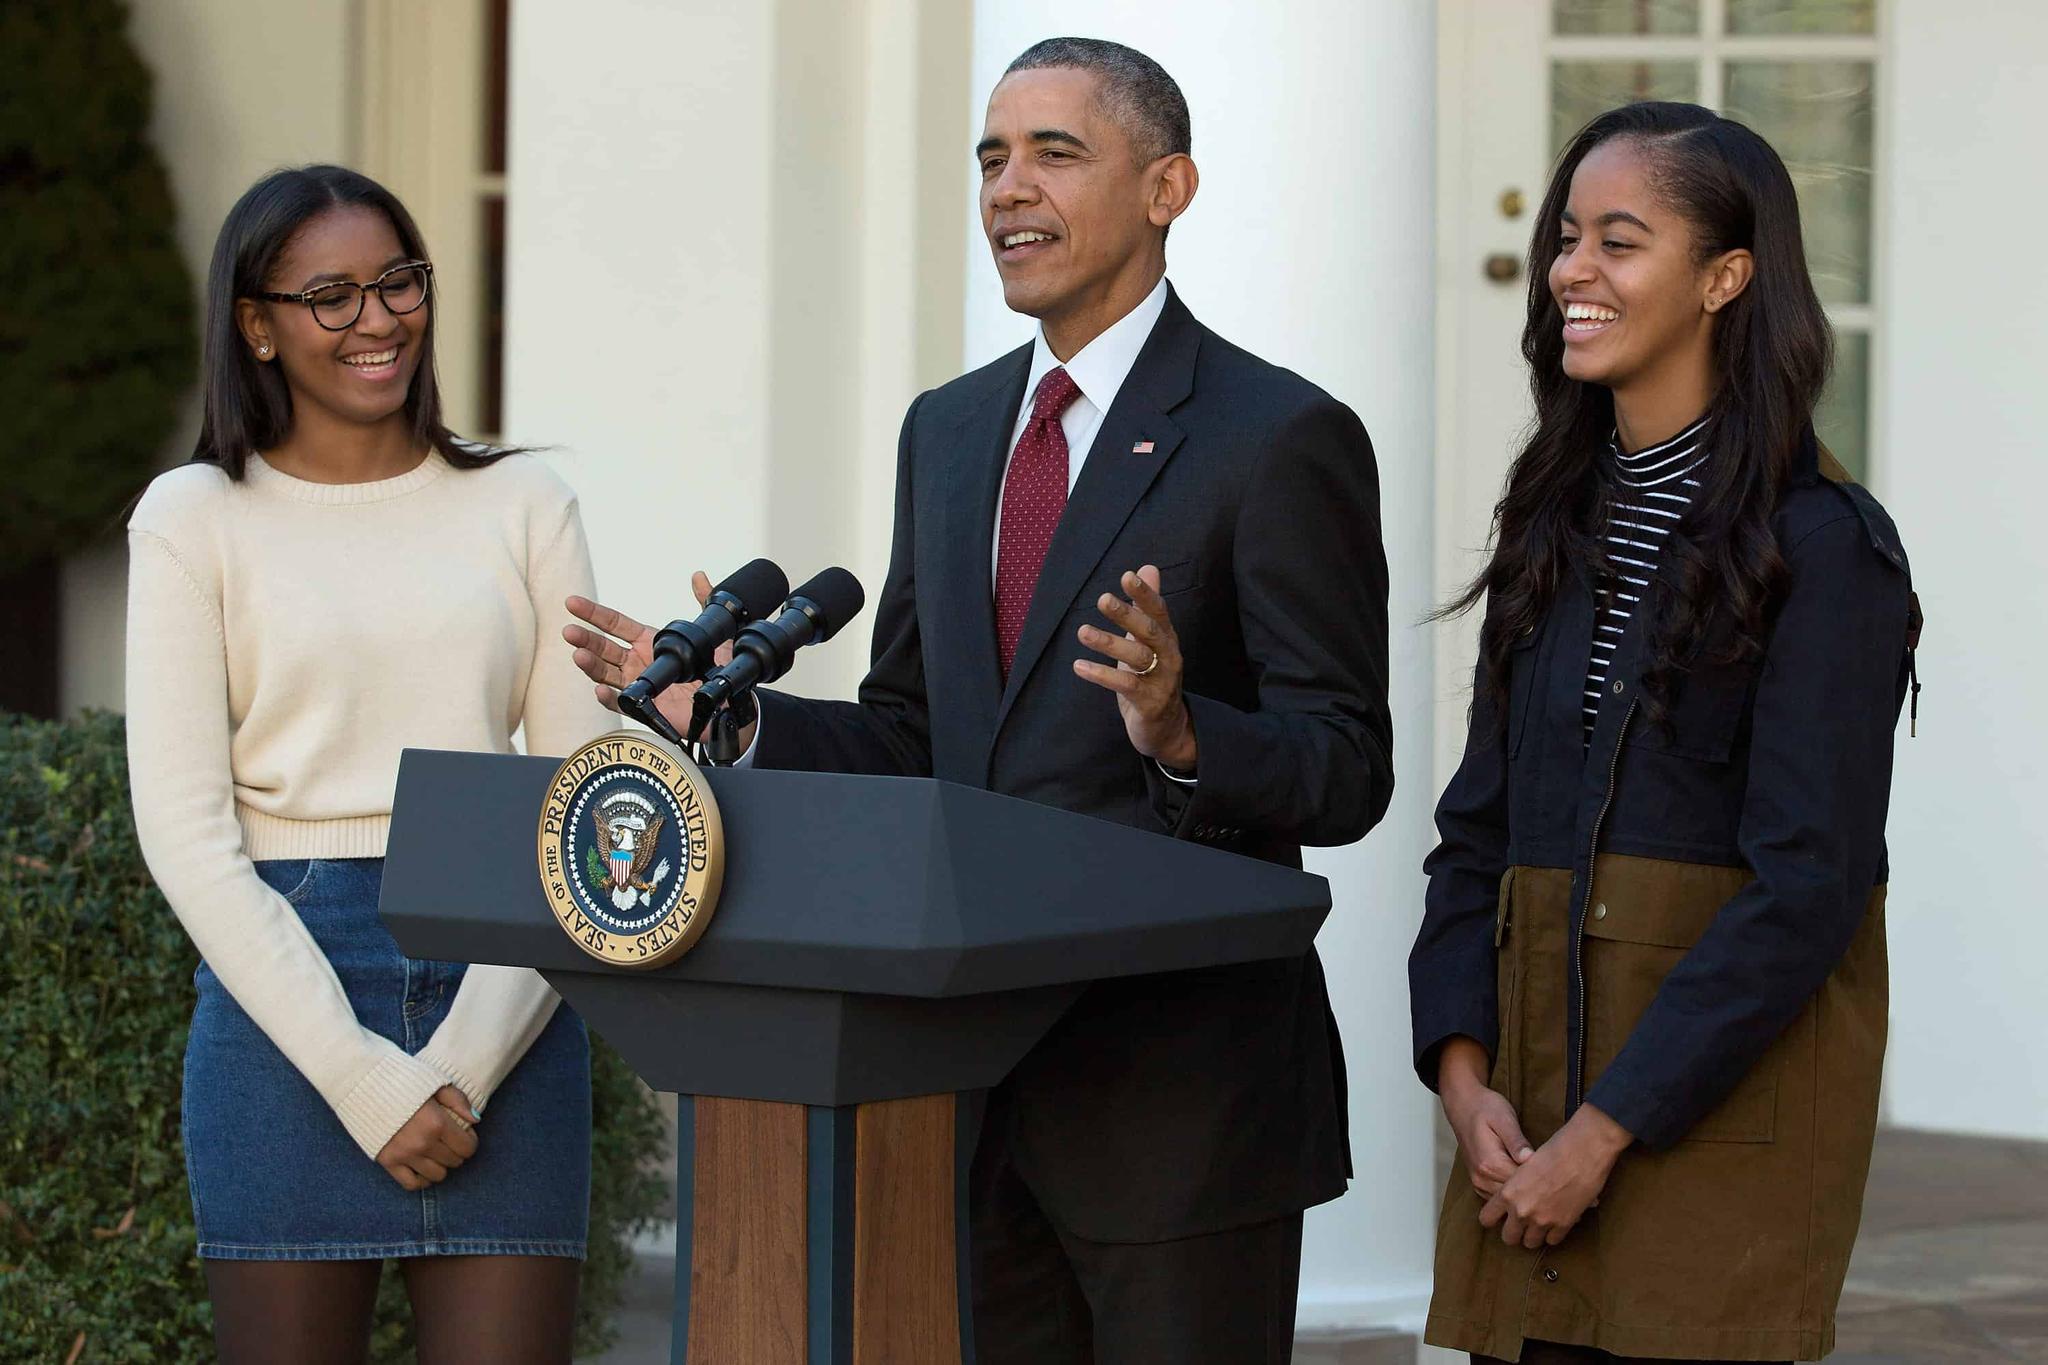 Malia Obama To Make Directorial Debut With Donald Glover